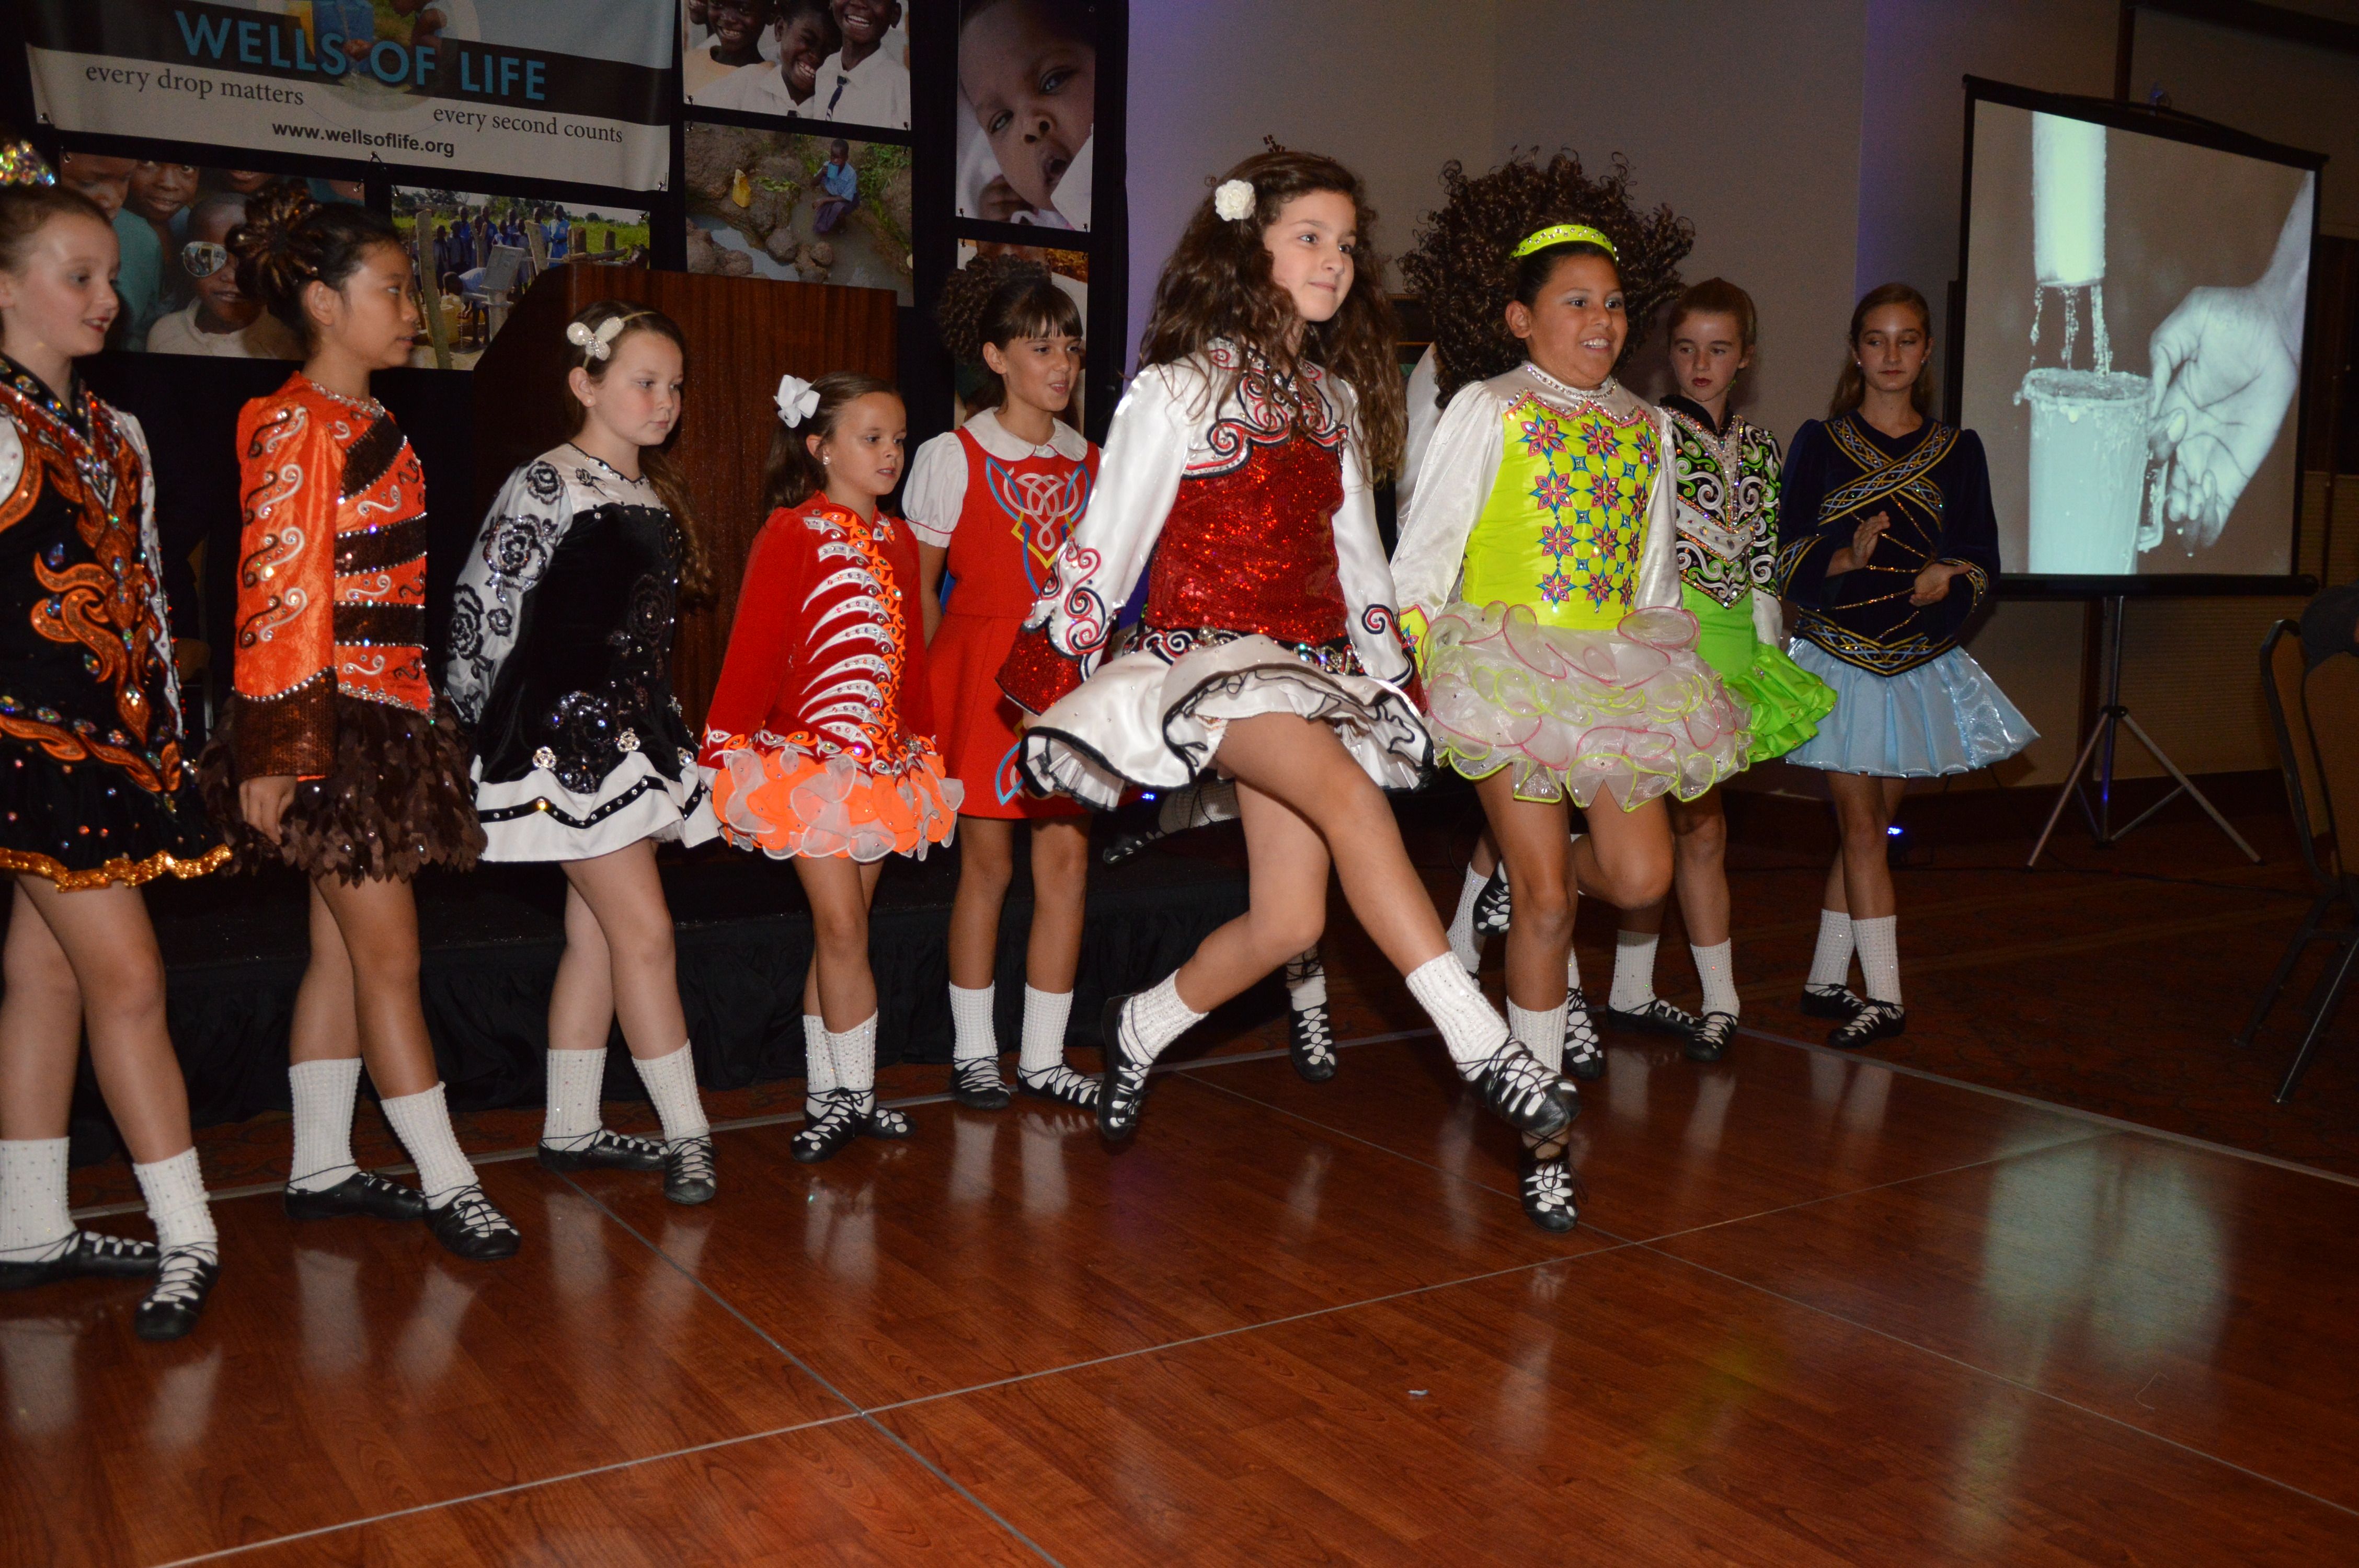 The night’s entertainment was provided by the Aniar Academy of Irish Dance of Laguna Niguel, led by Christine Byrne, award winning dance instructor.